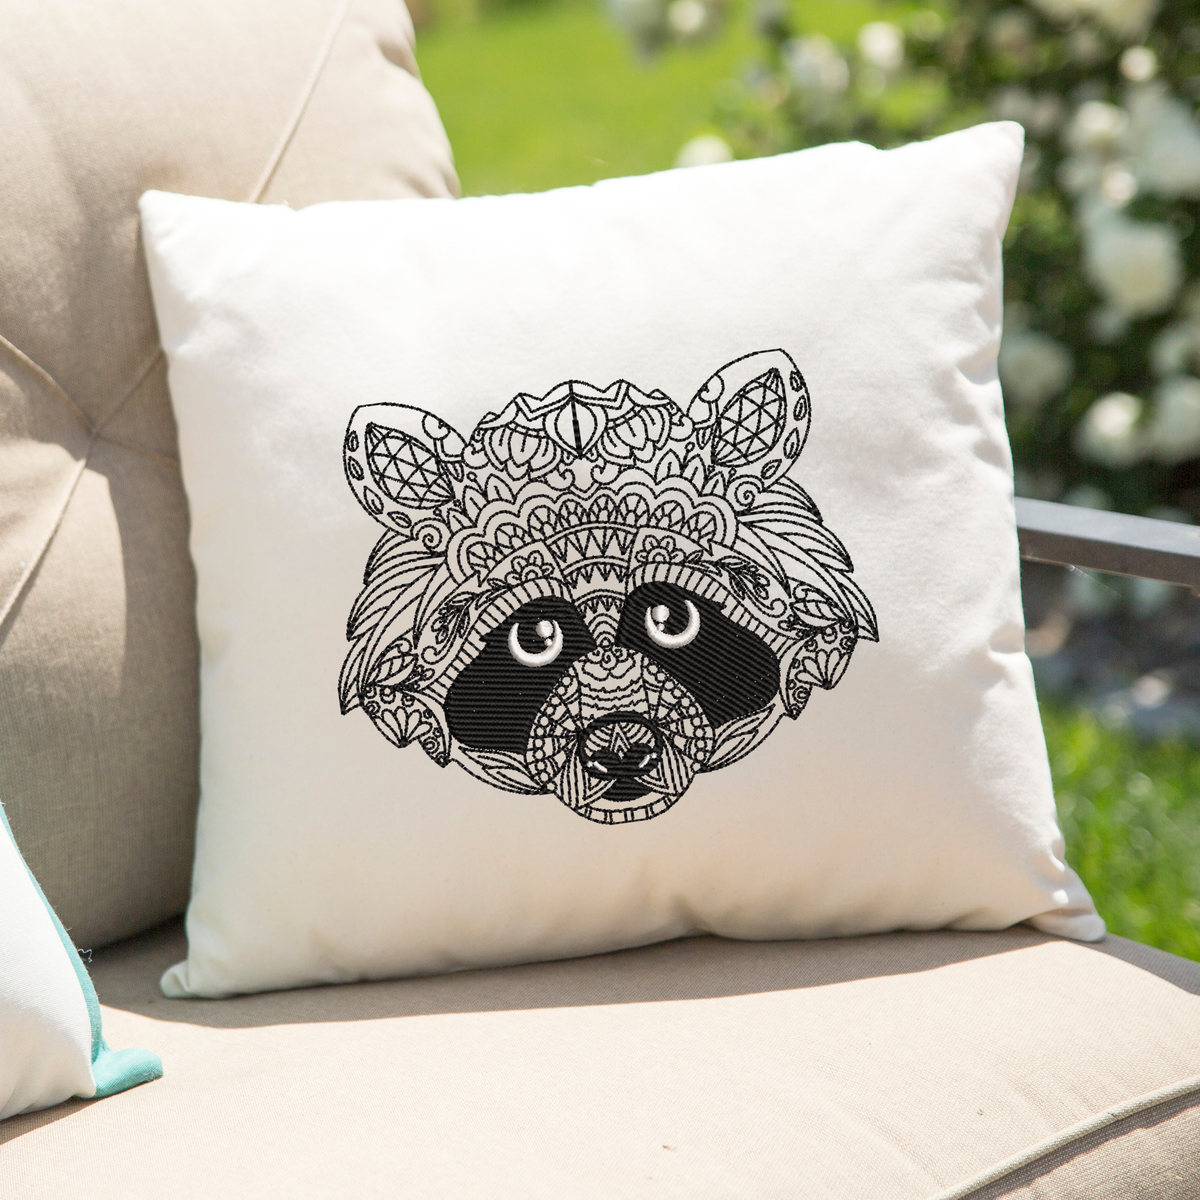 Henna Raccoon Face 2021 Embroidery Design - Oh My Crafty Supplies Inc.